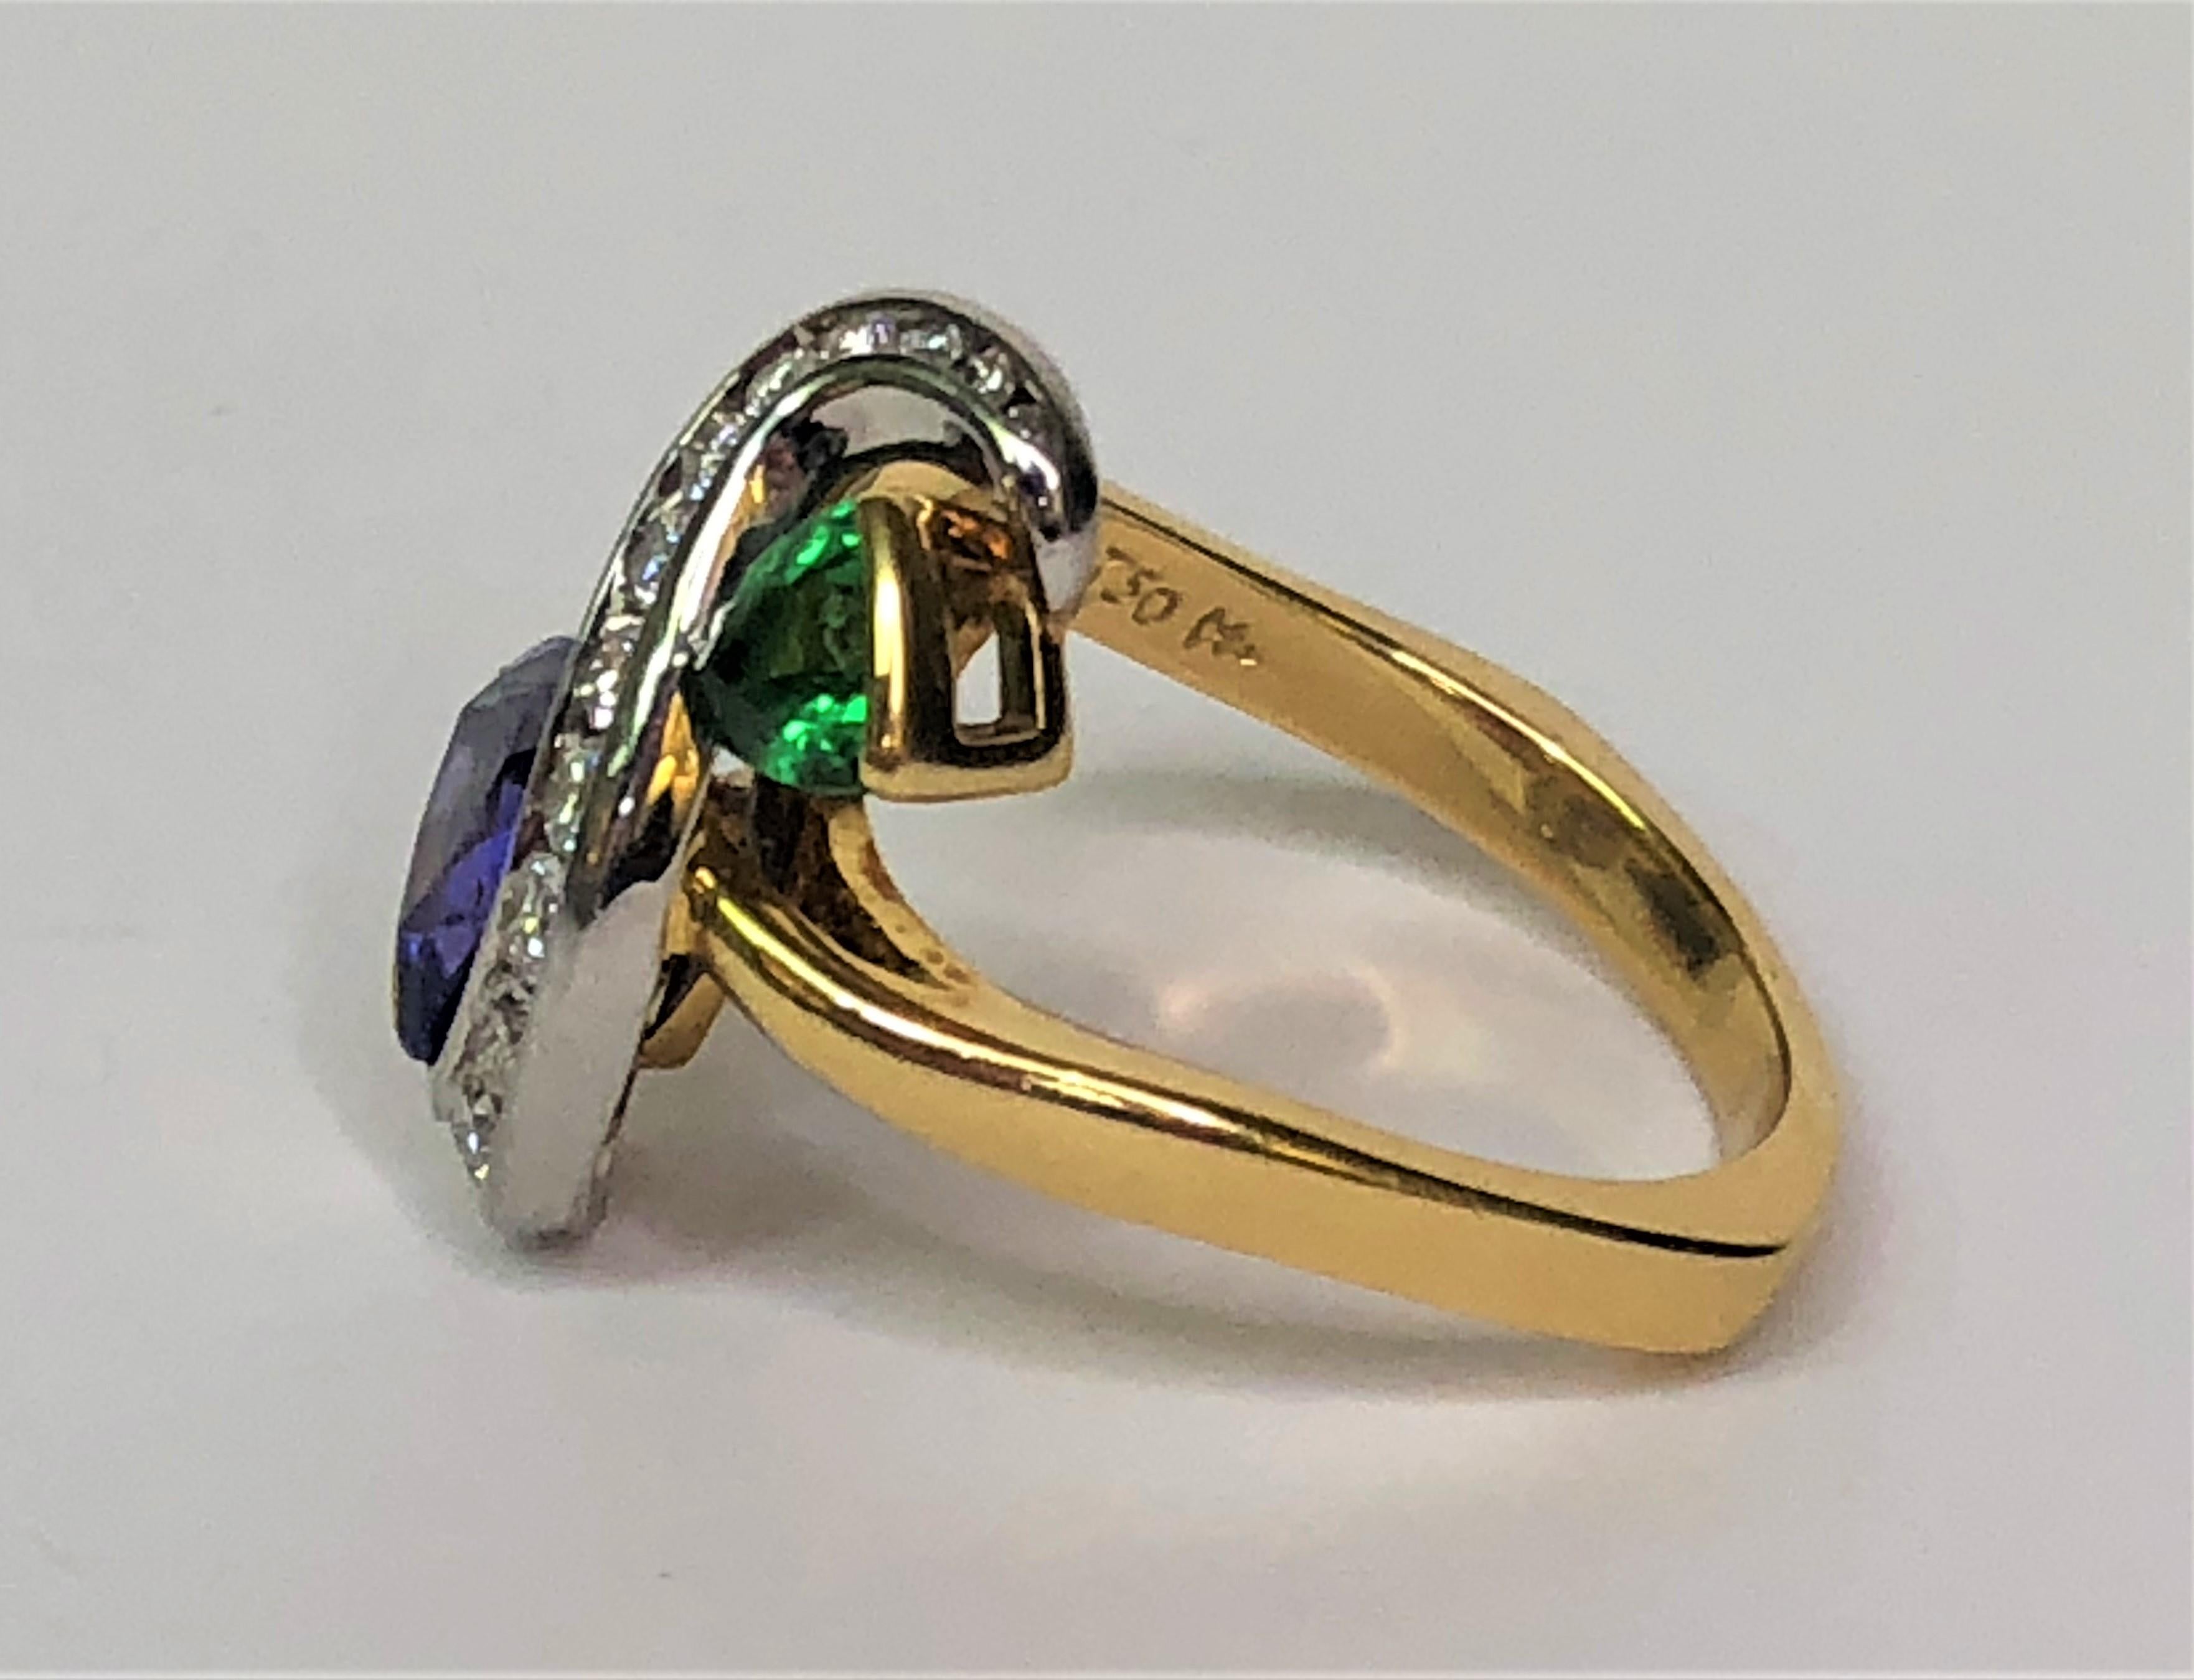 This Richard Krementz design is unique and will for sure catch attention!
18 karat yellow gold and platinum mounting.
The head of the ring is in the shape of an 's' with:
- 1 trillion cut 1.95 carat tanzanite.
- 14 round diamonds, .34tdw.
- 1